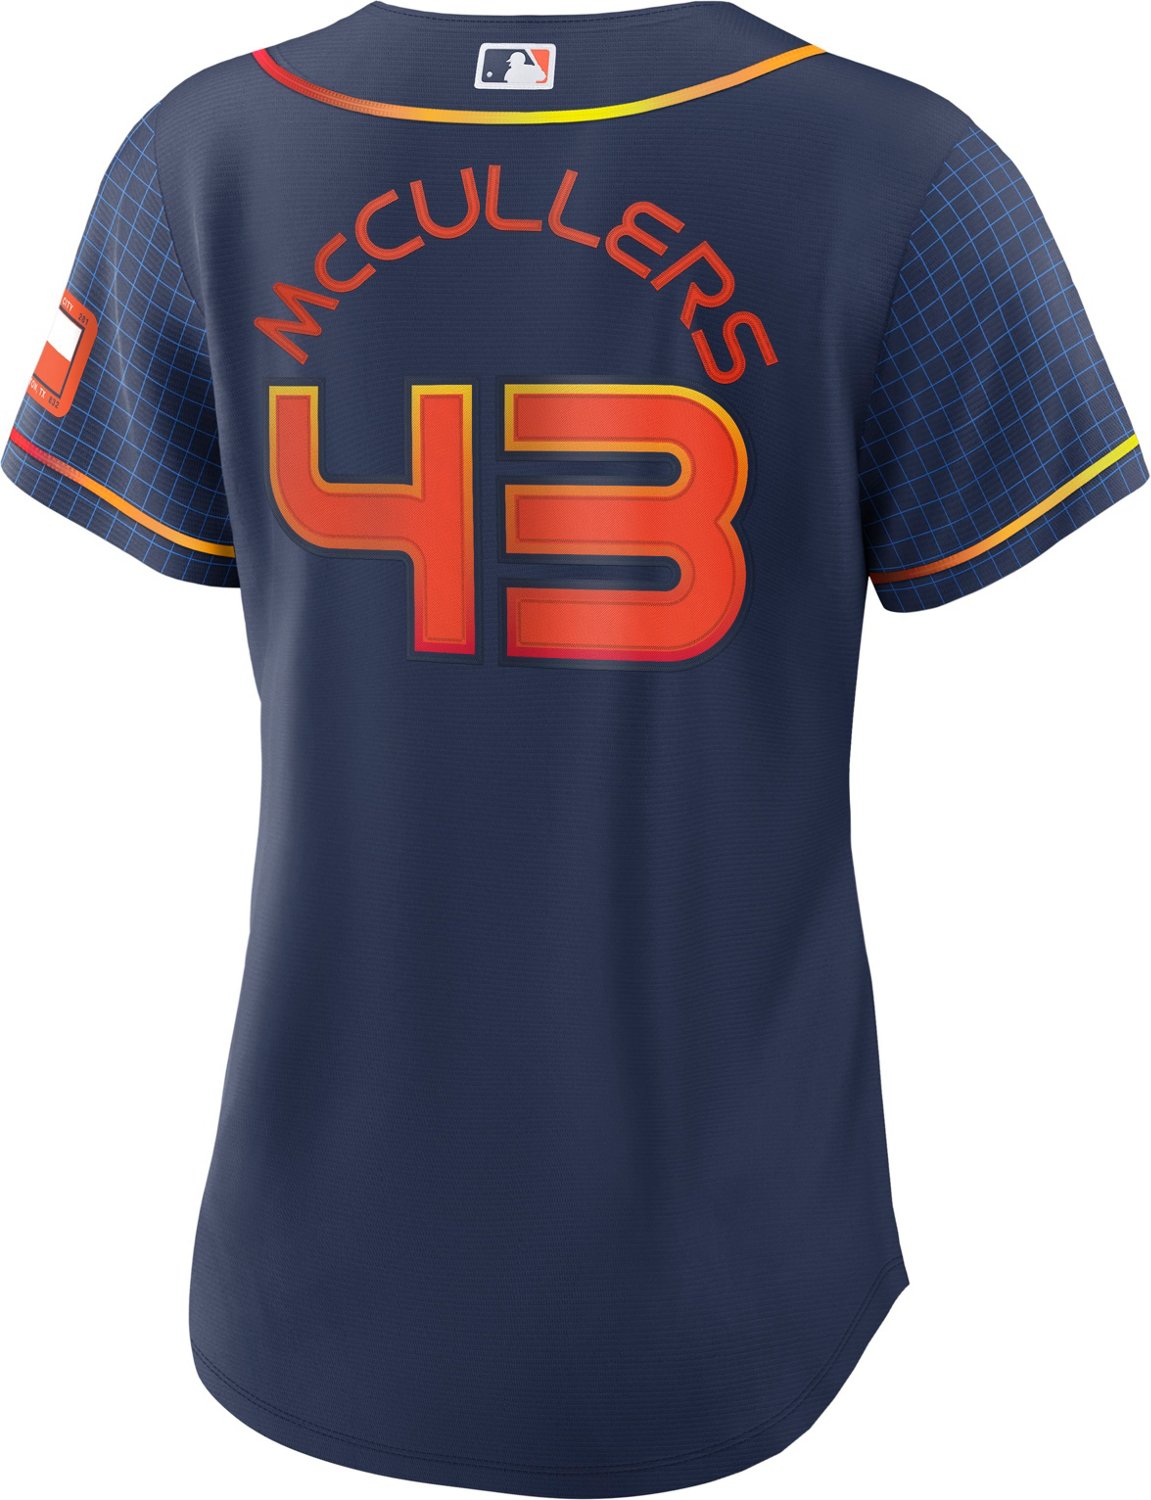 MLB Houston Astros Lance McCullers Jr Stadium Giveaway Jersey Adult XL Blue  #43